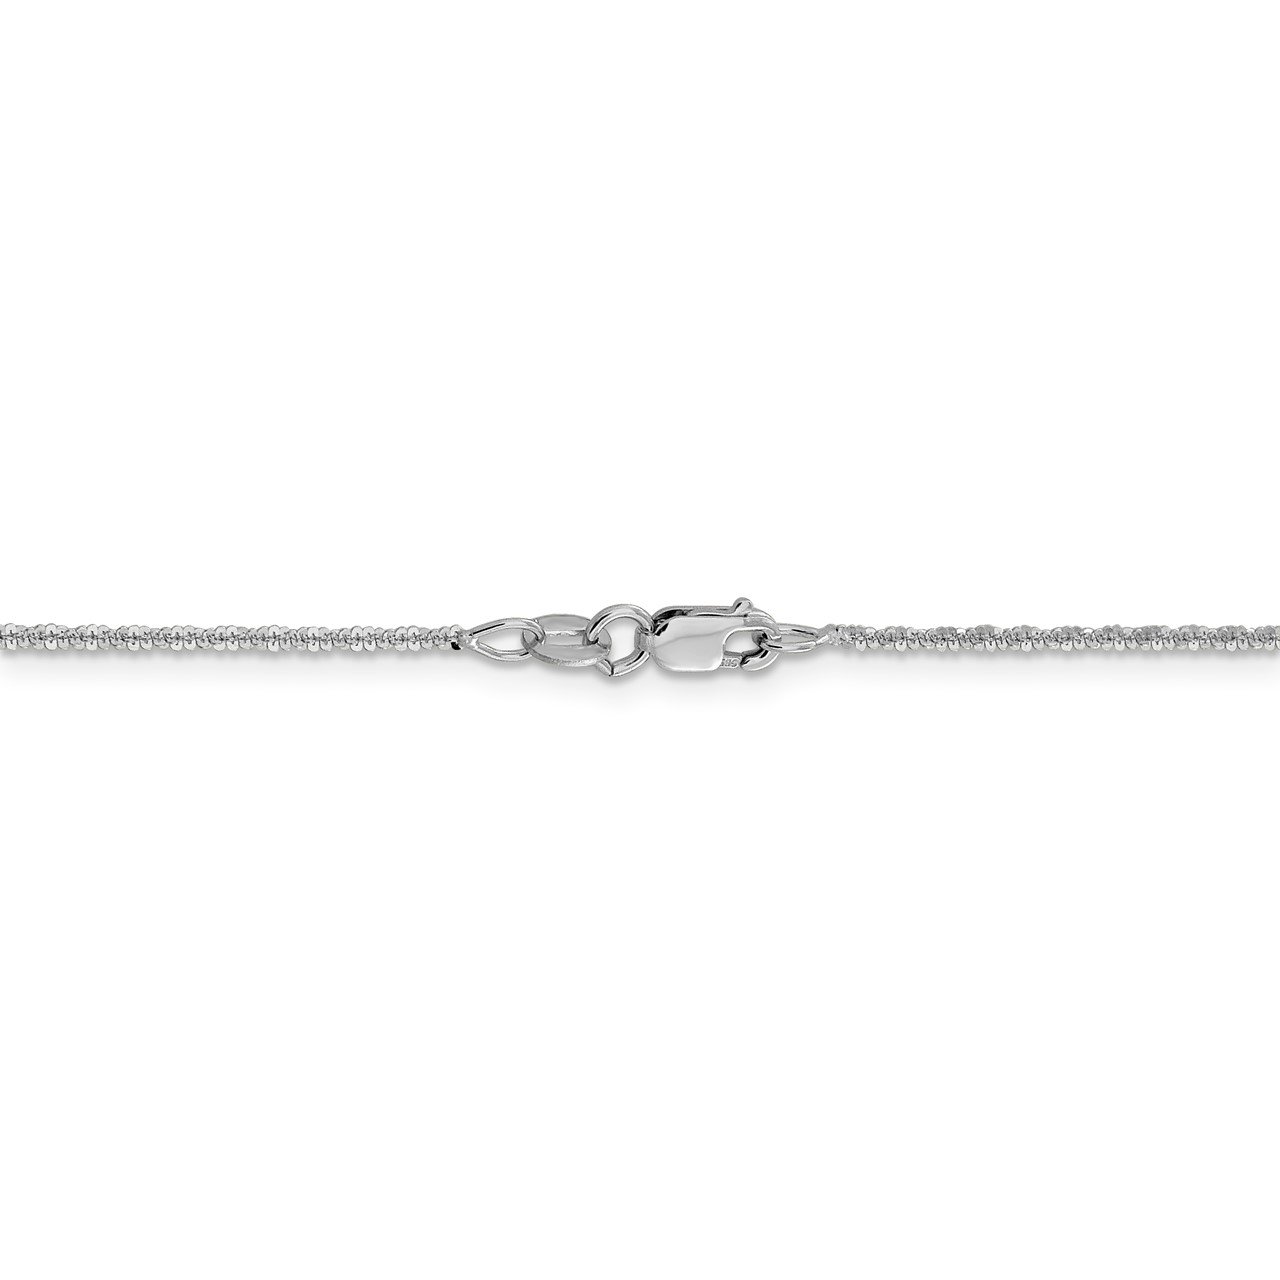 Leslie's 14K White Gold 1.5mm Cyclone Chain-3